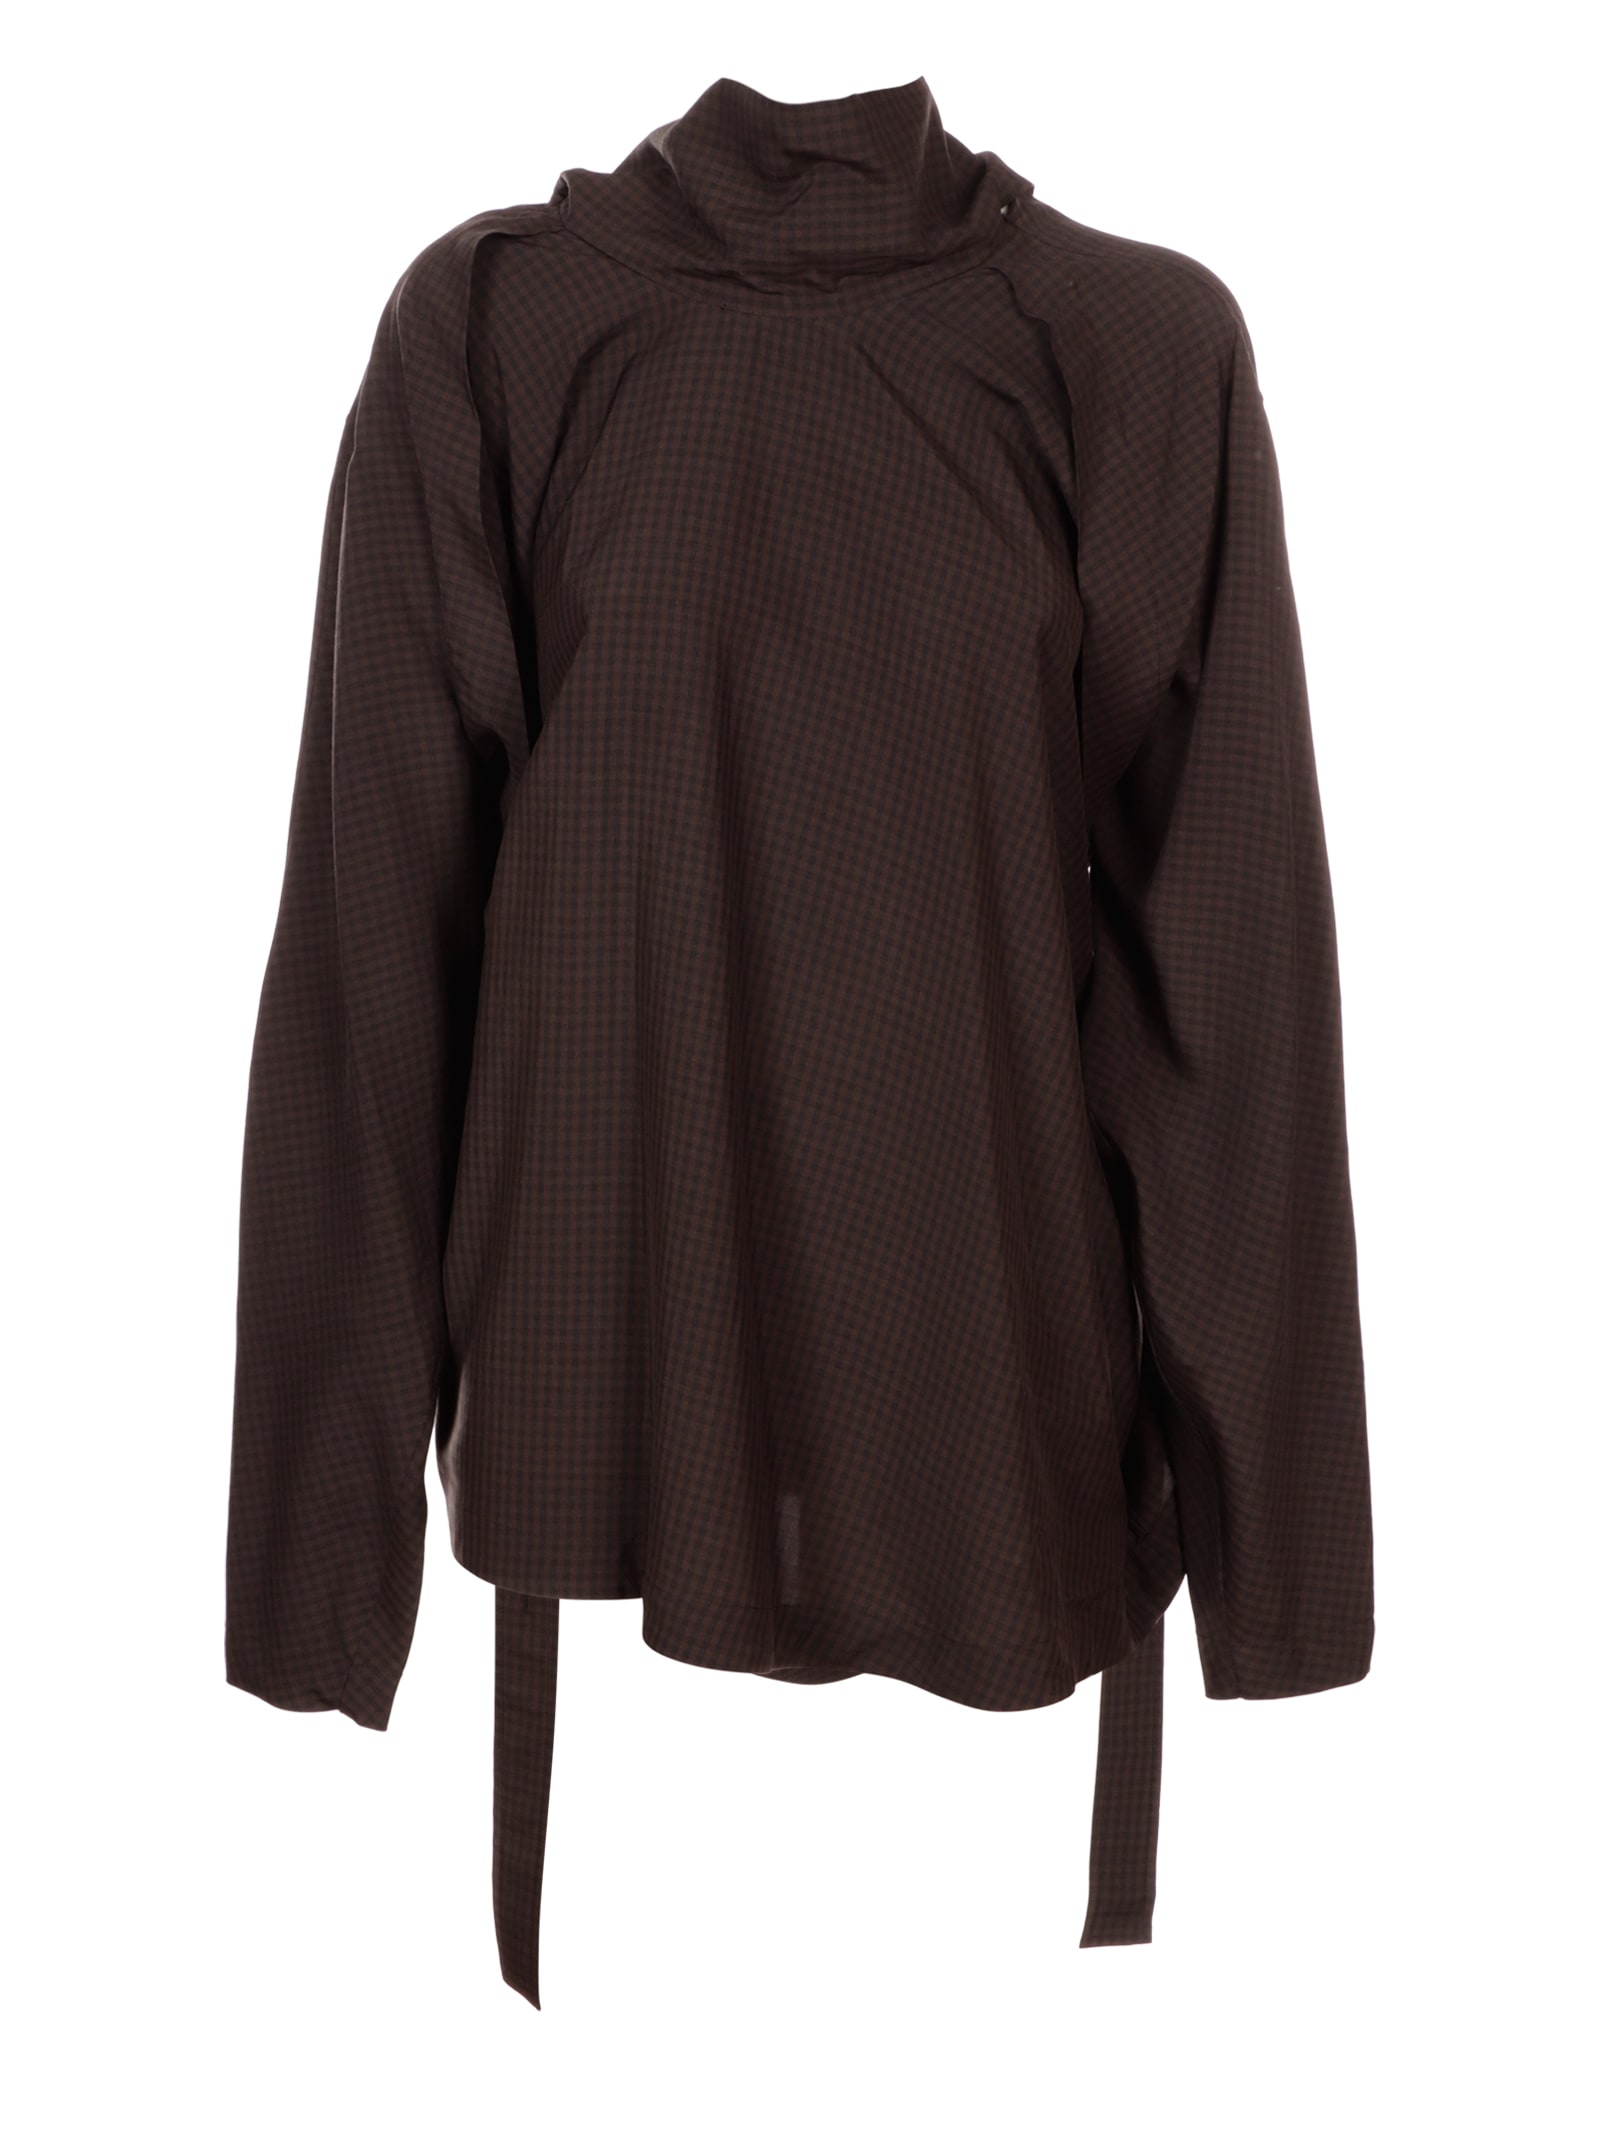 Lemaire Belted Tilted Top